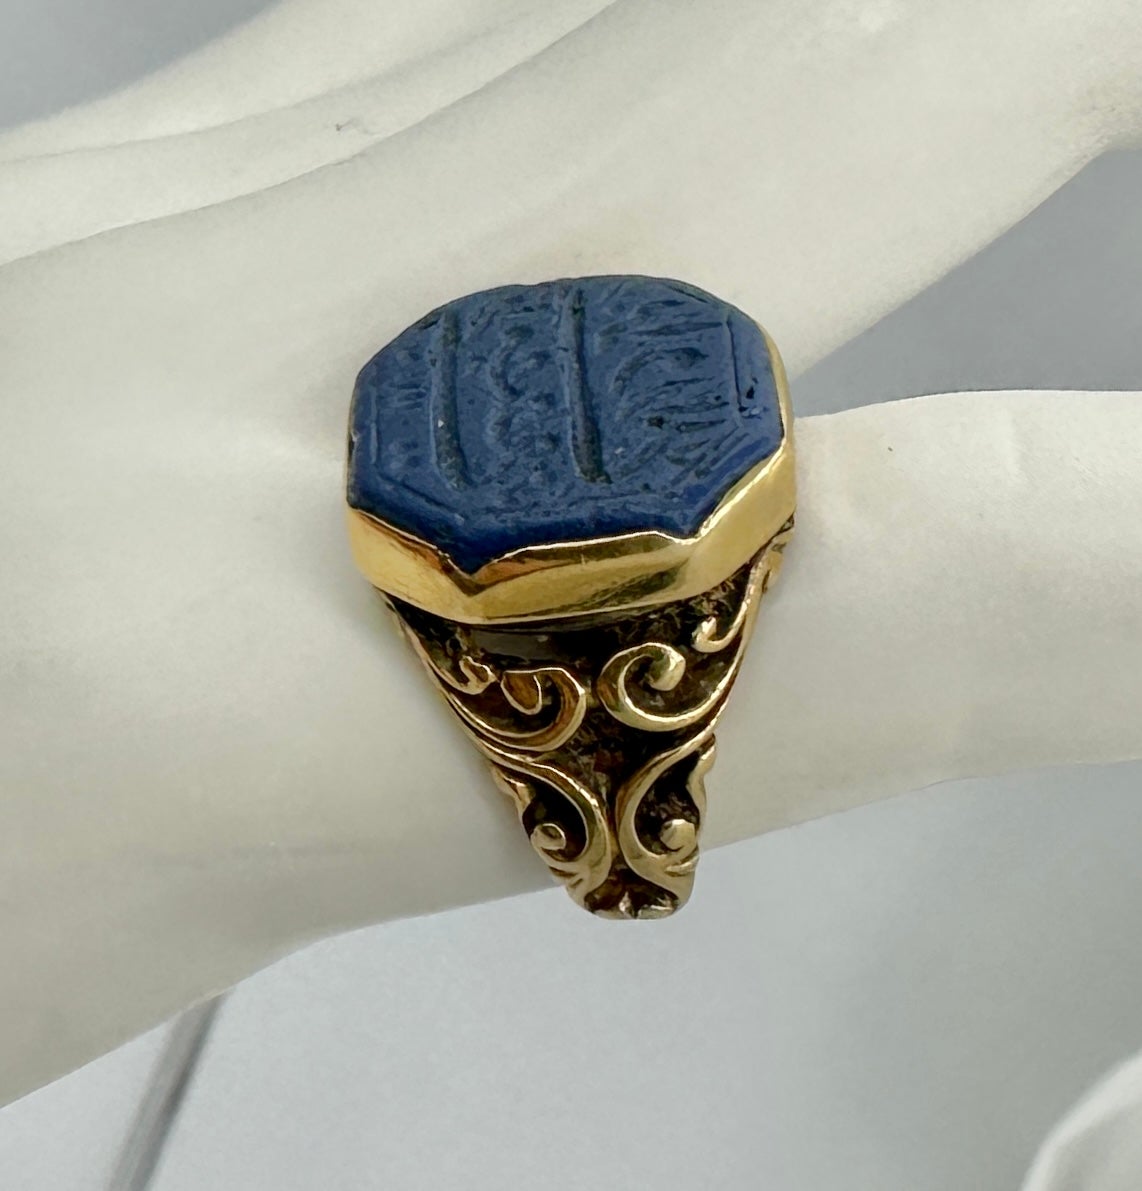 This is a stunning early antique Egyptian Revival Ring with Lapis Lazuli engraved with Arabic or Heiroglyphics in 18 Karat Gold.  The fabulous ring has a wonderful blue octagonal lapis center with elegant engraving which I believe is arabic writing.